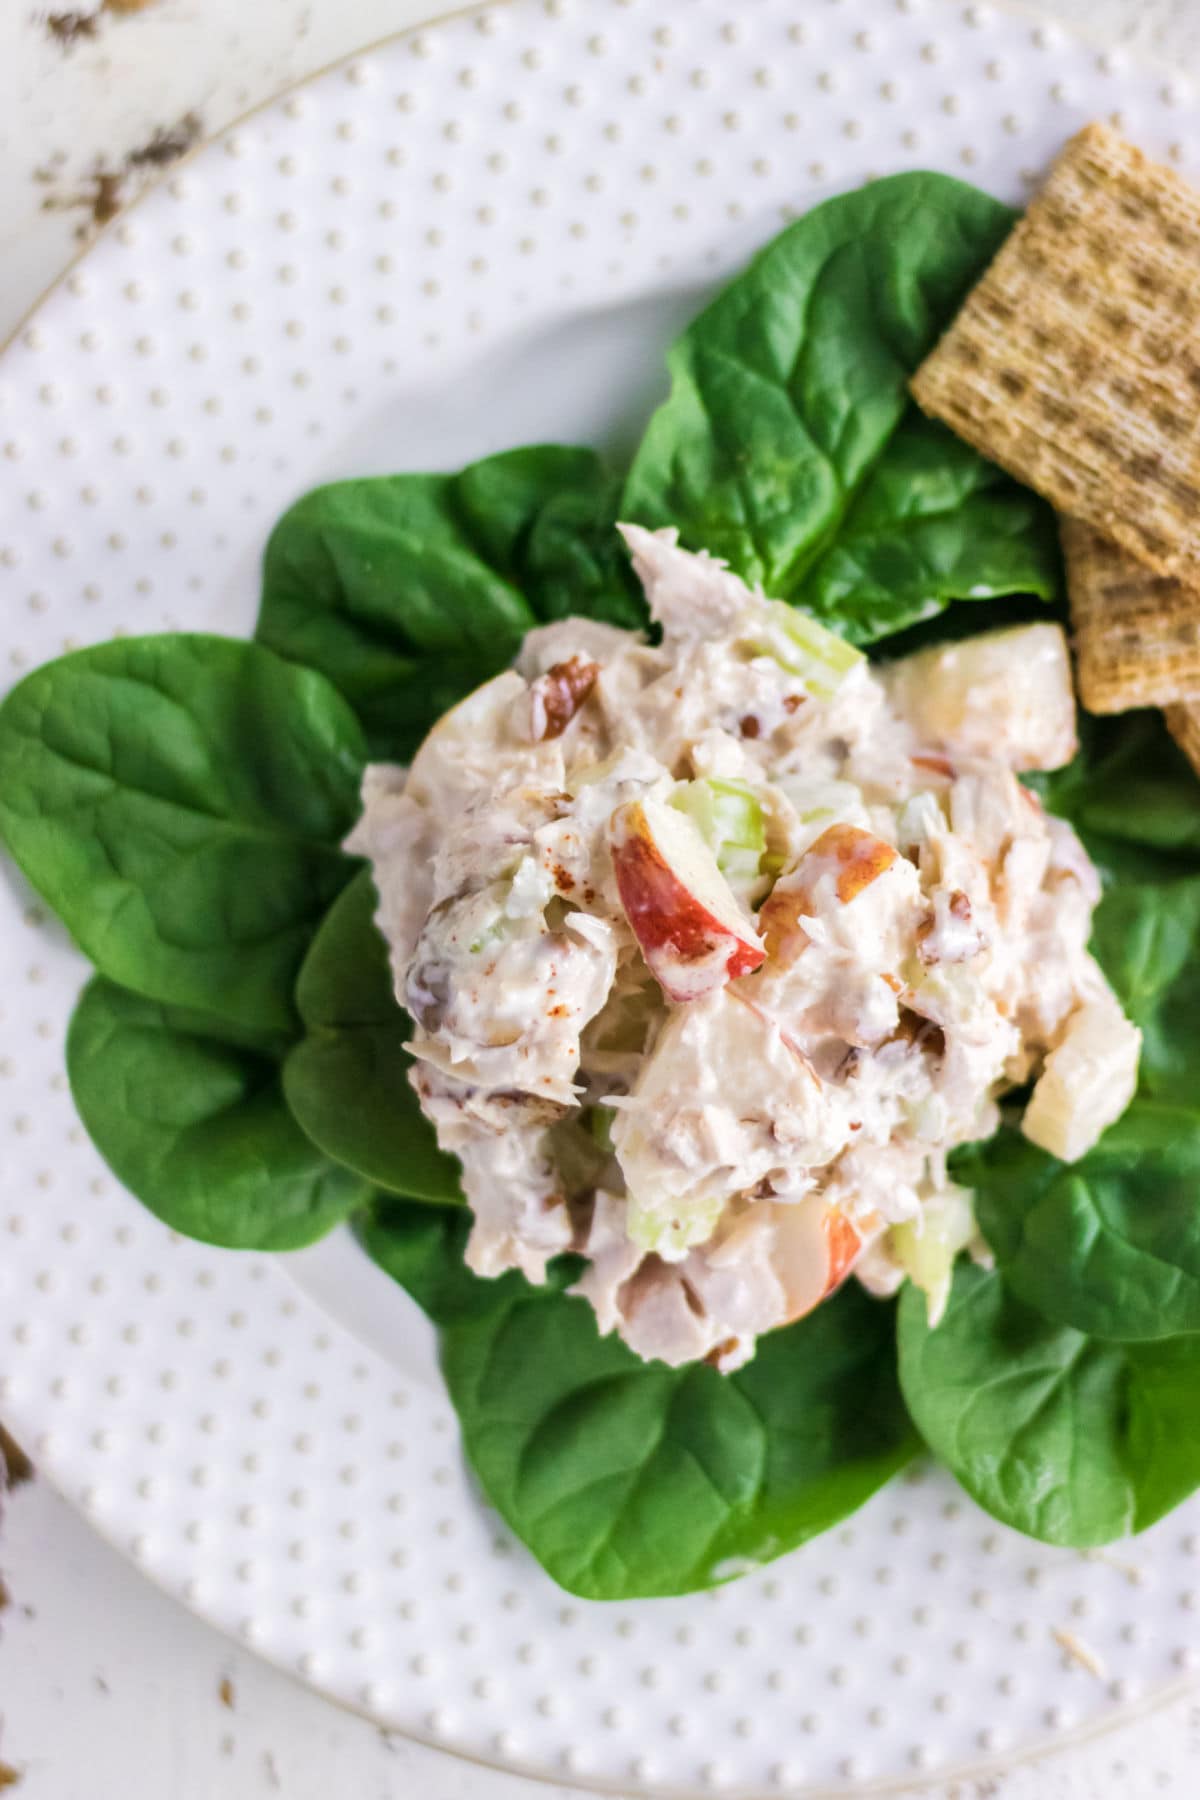 A scoop of tuna salad on spinach leaves.